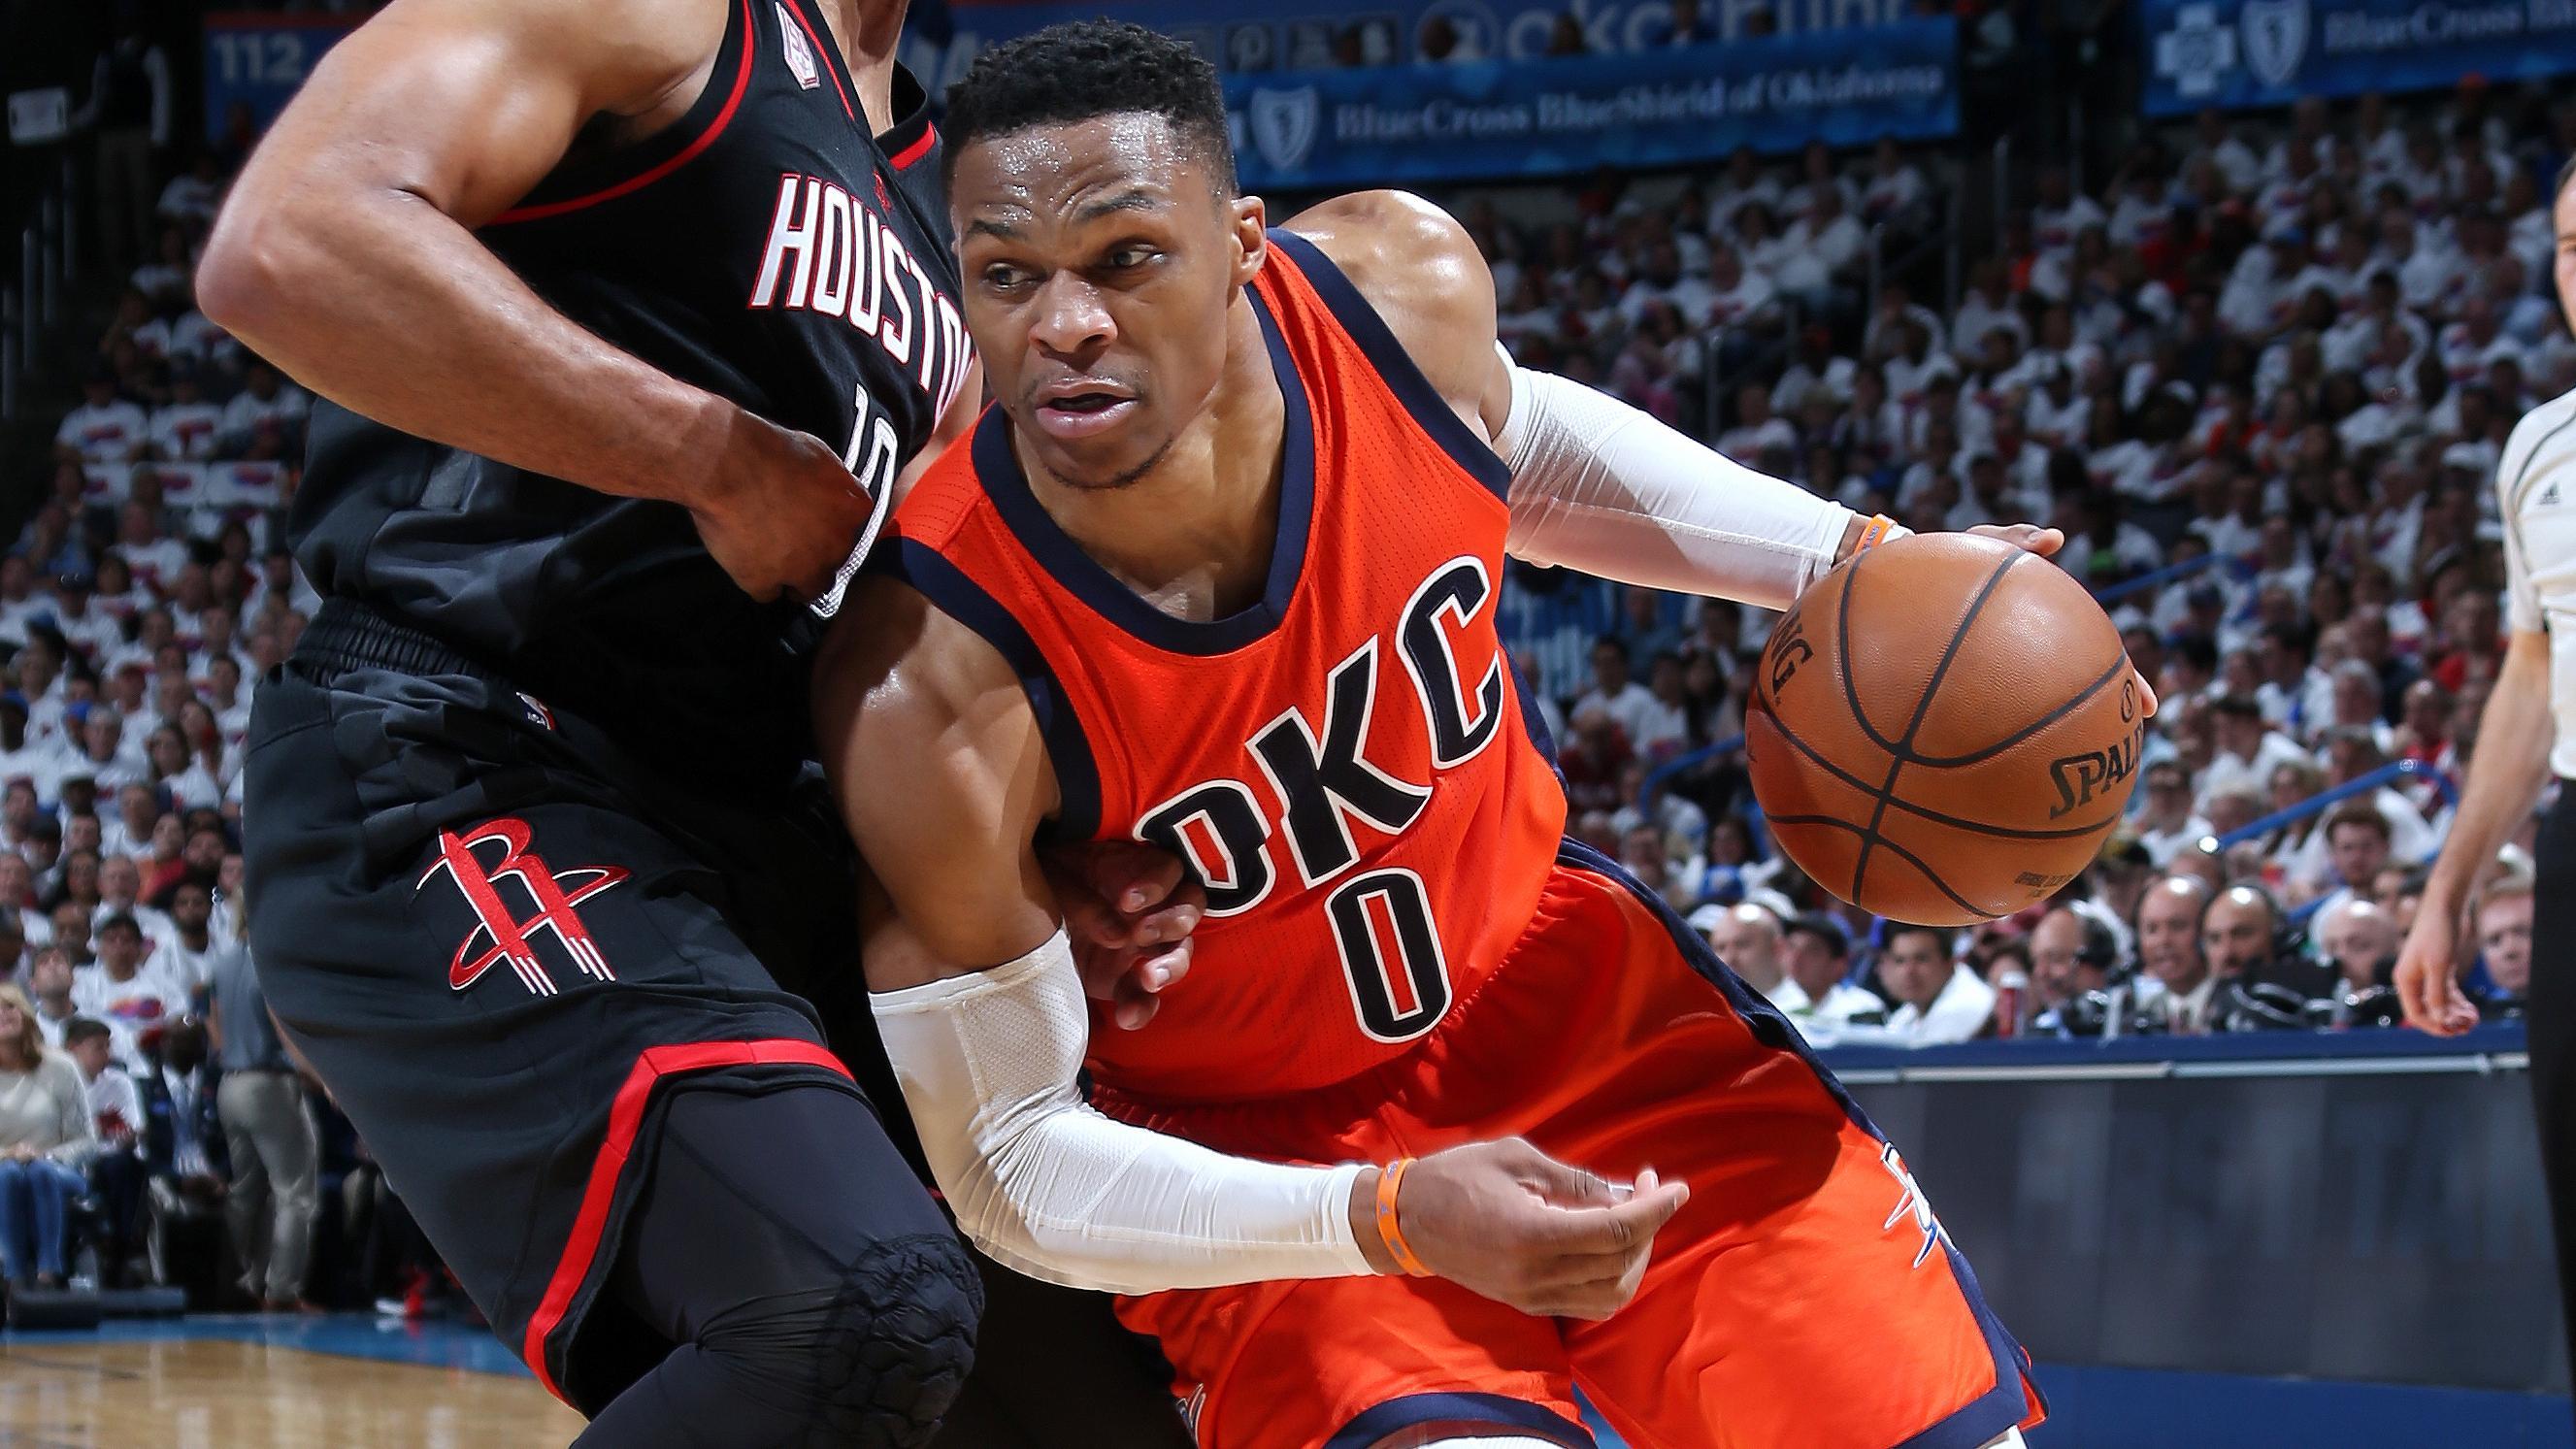 Westbrook clinches triple-double in first half vs. Rockets